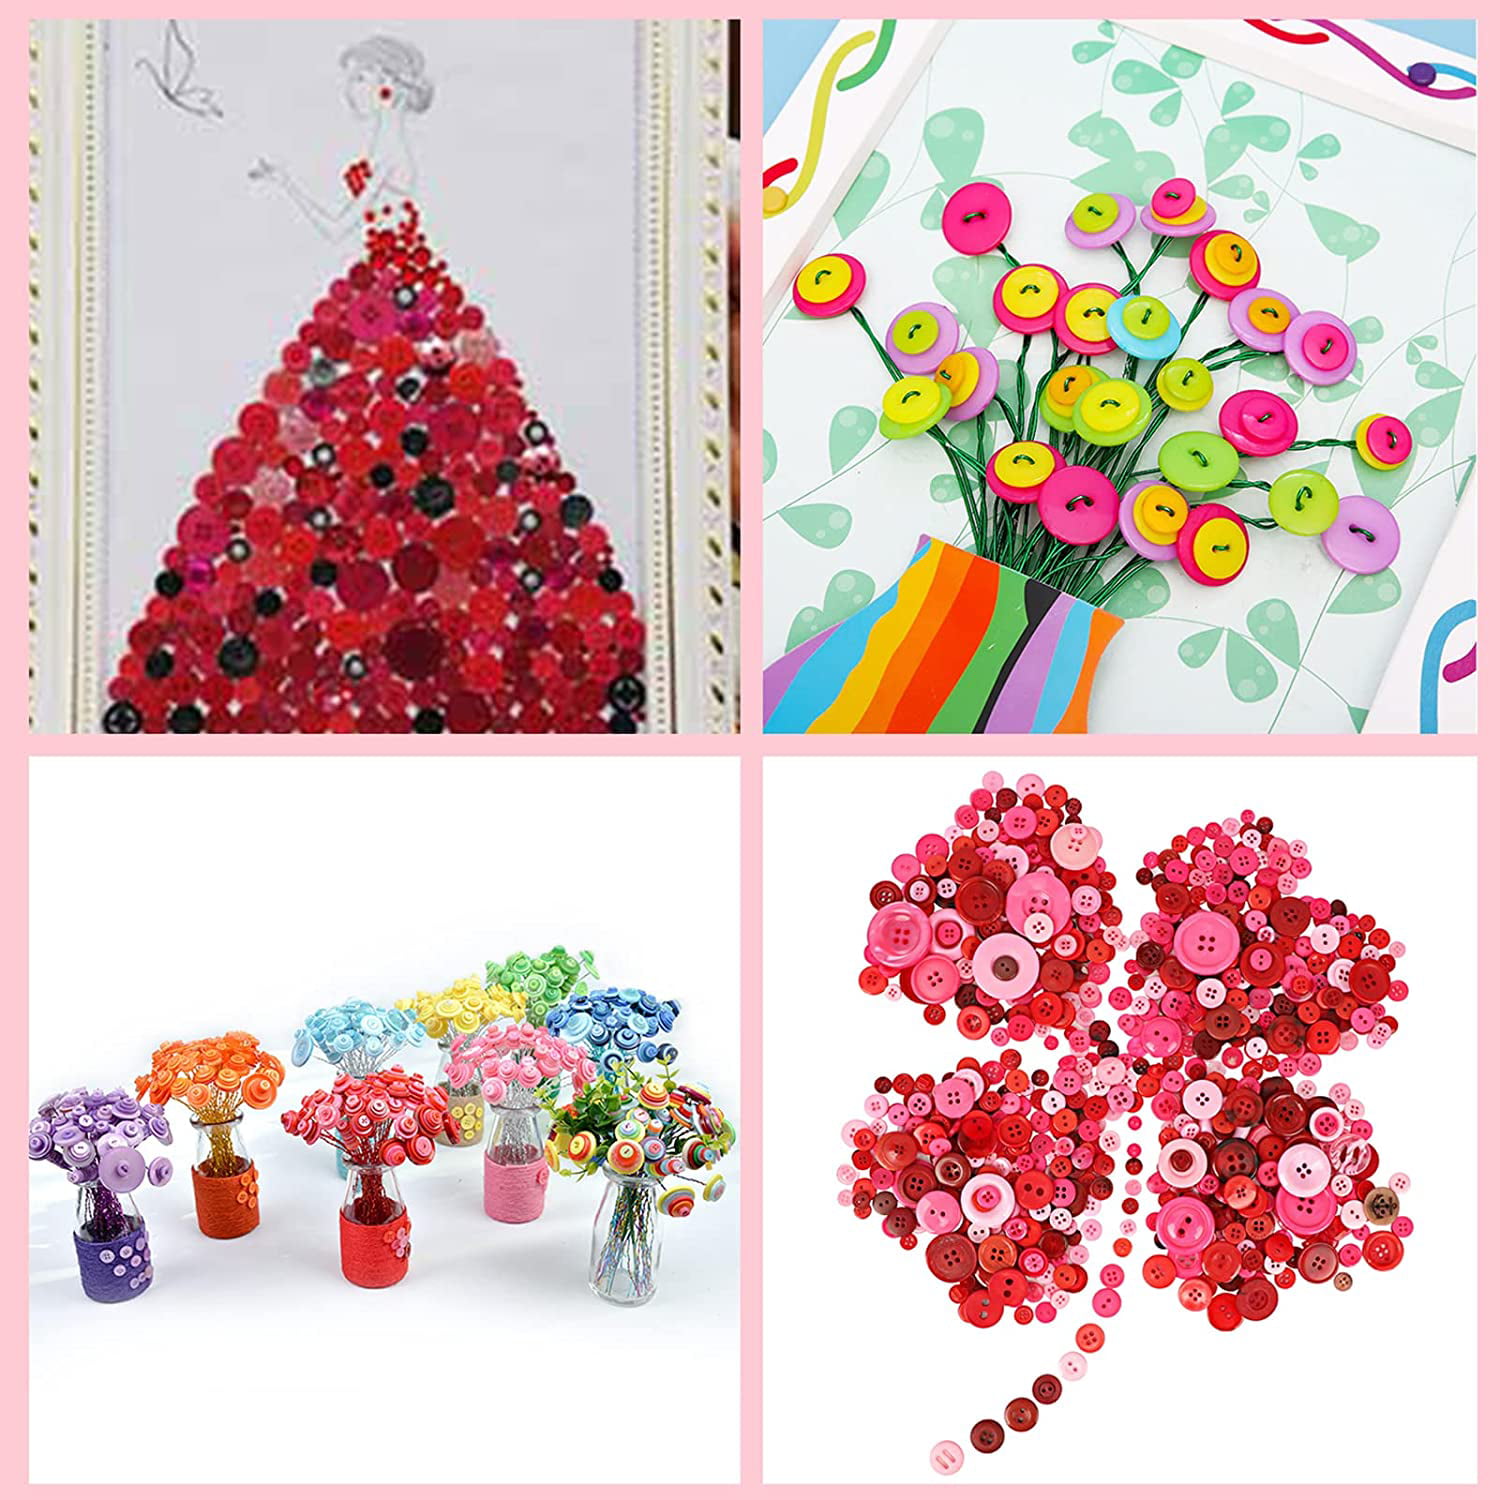 Resin Buttons Assorted Sizes Craft Buttons About 500-600 Pcs for Sewing DIY  Crafts,Children's Manual Button Painting, Red